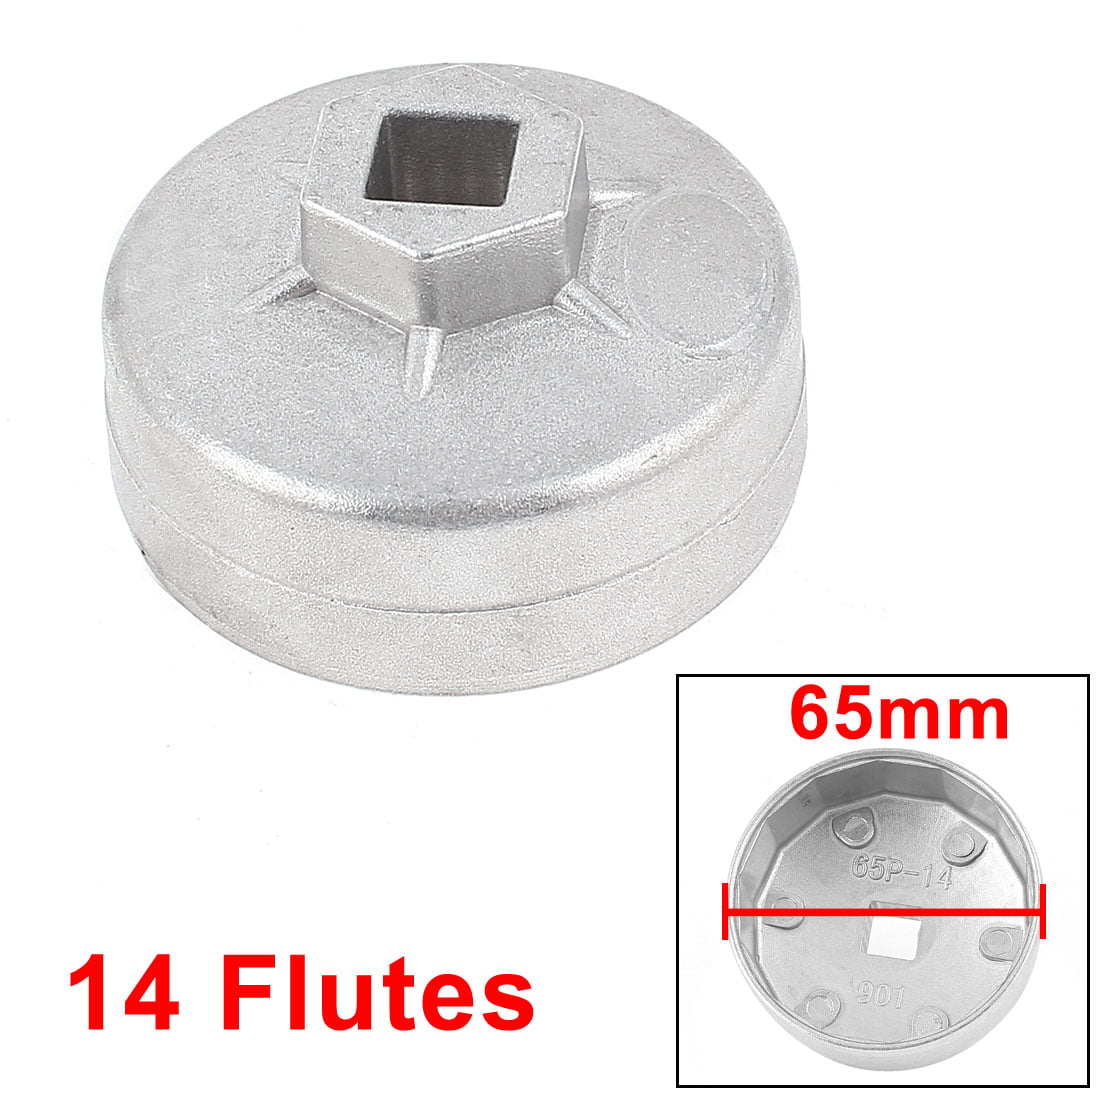 14 Flutes Oil Filter Cartridge Cap Wrench Tool Socket Remover for Auto Car P&T 